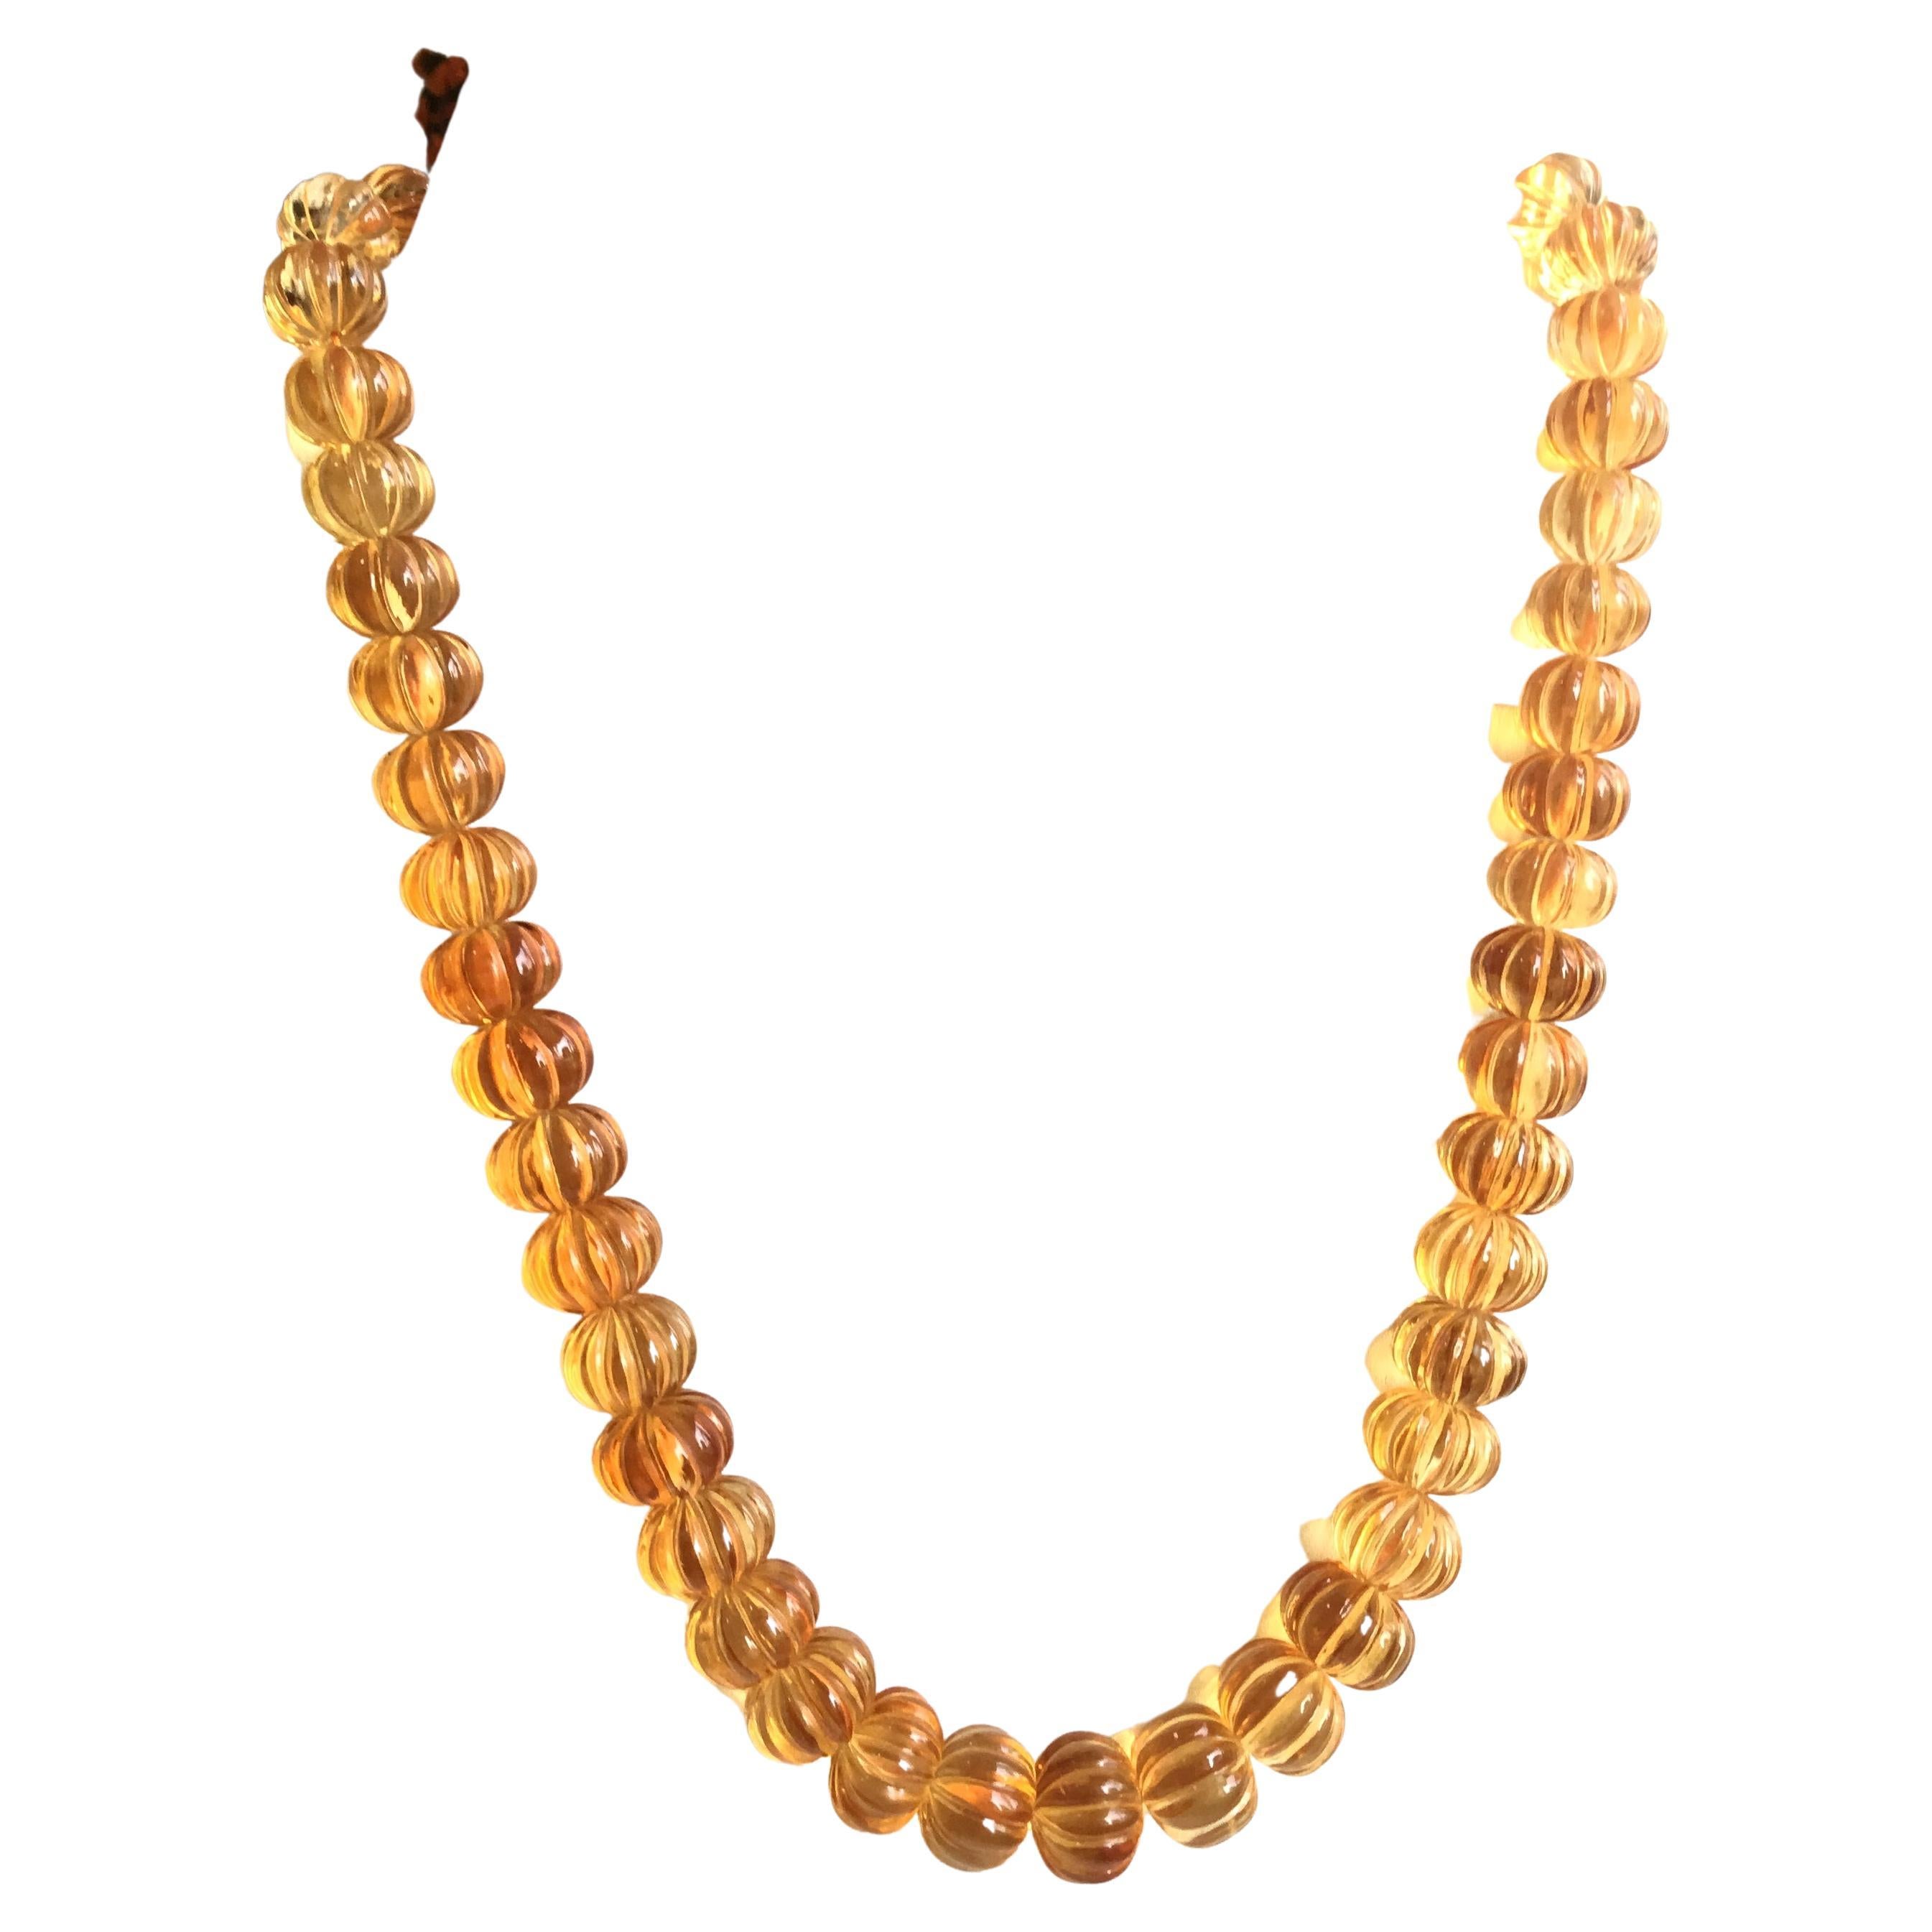 Top Quality Citrine Carved Melon Beads Natural Gemstone Necklace For Sale